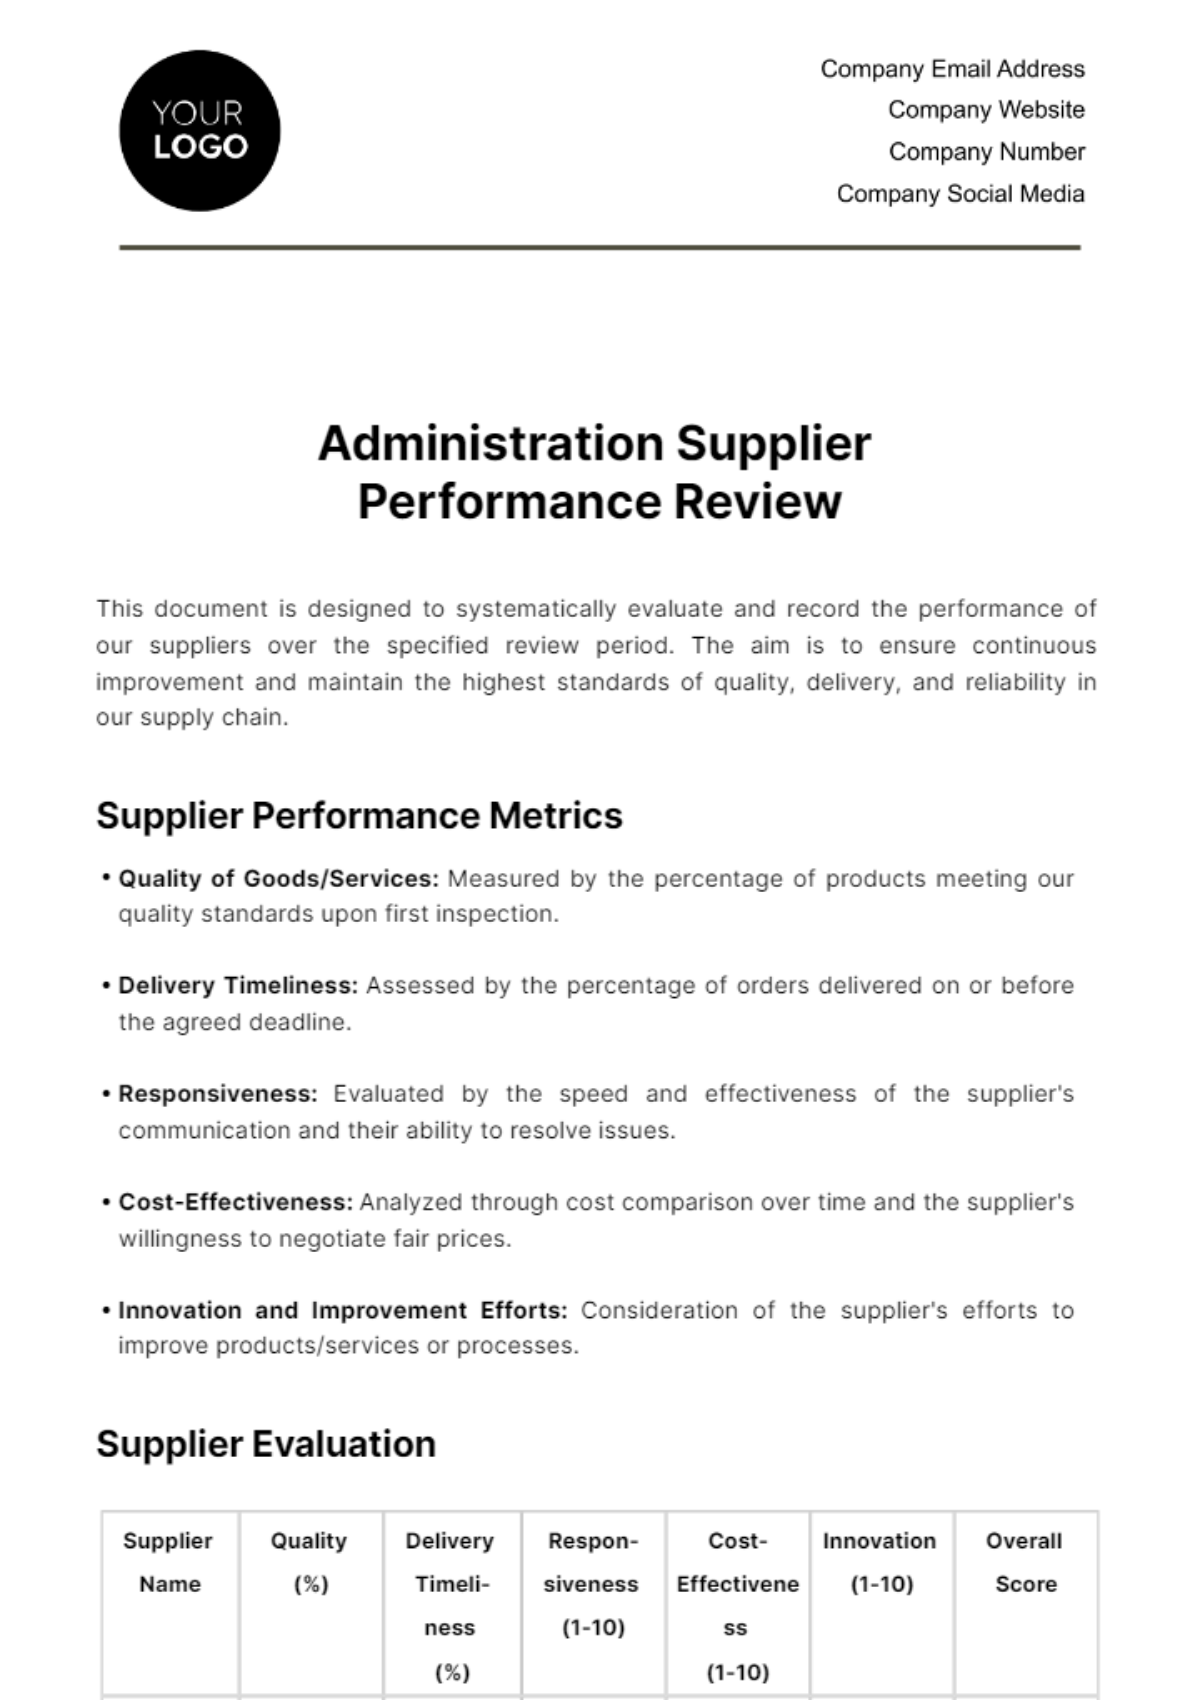 Free Administration Supplier Performance Review Template